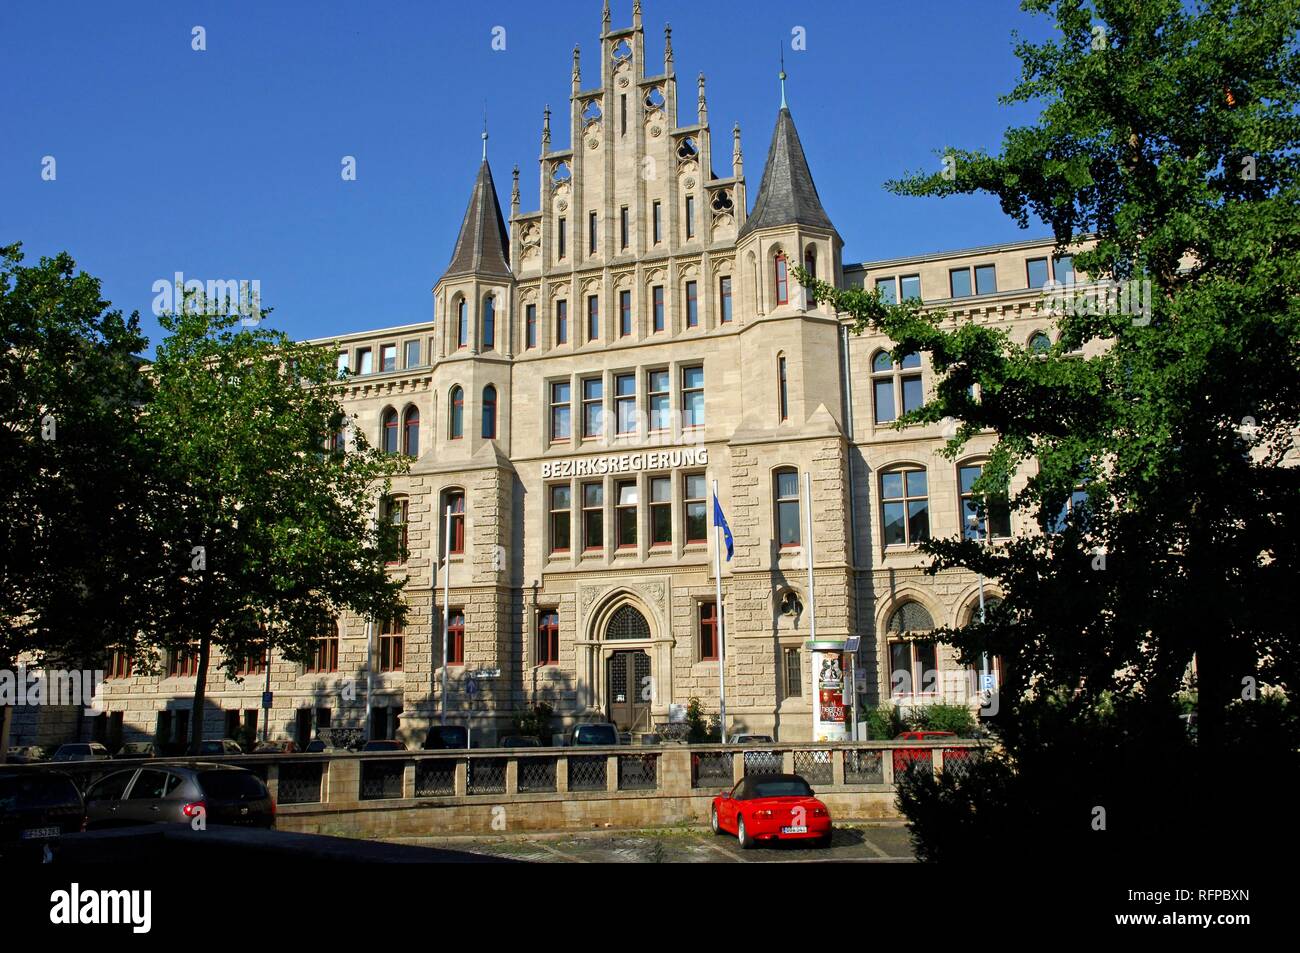 District government buidling, Brunswick, Lower Saxony, Germany Stock Photo